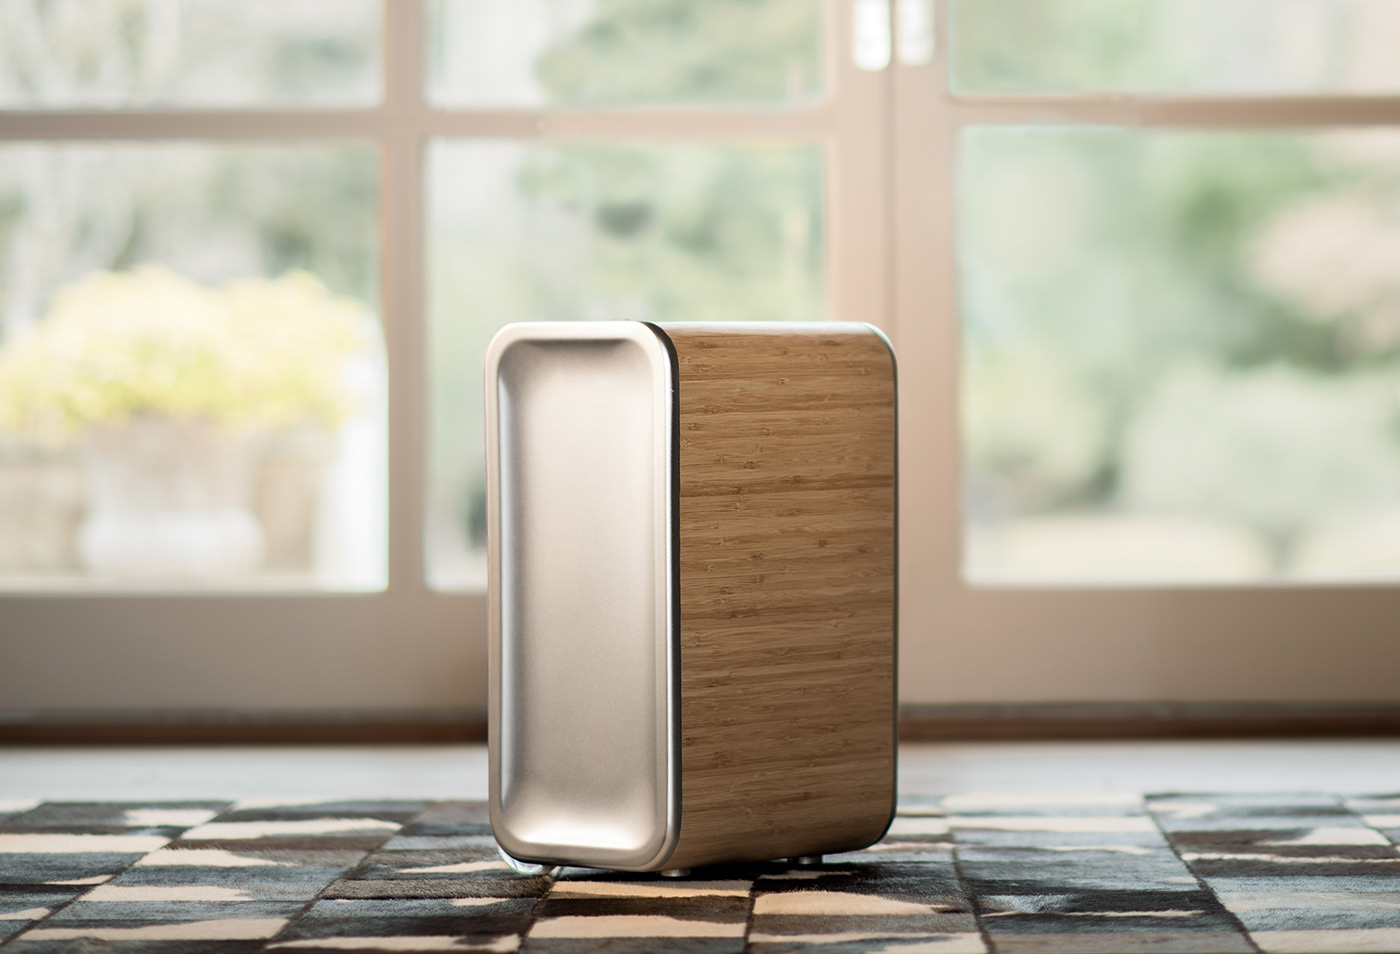 Fashion Luggage Crowd founding project Live on Kickstarter industrial design  product design  fashion design Functional Design Materials combination MINIMALISTIC CARRY-ON bamboo and aluminium